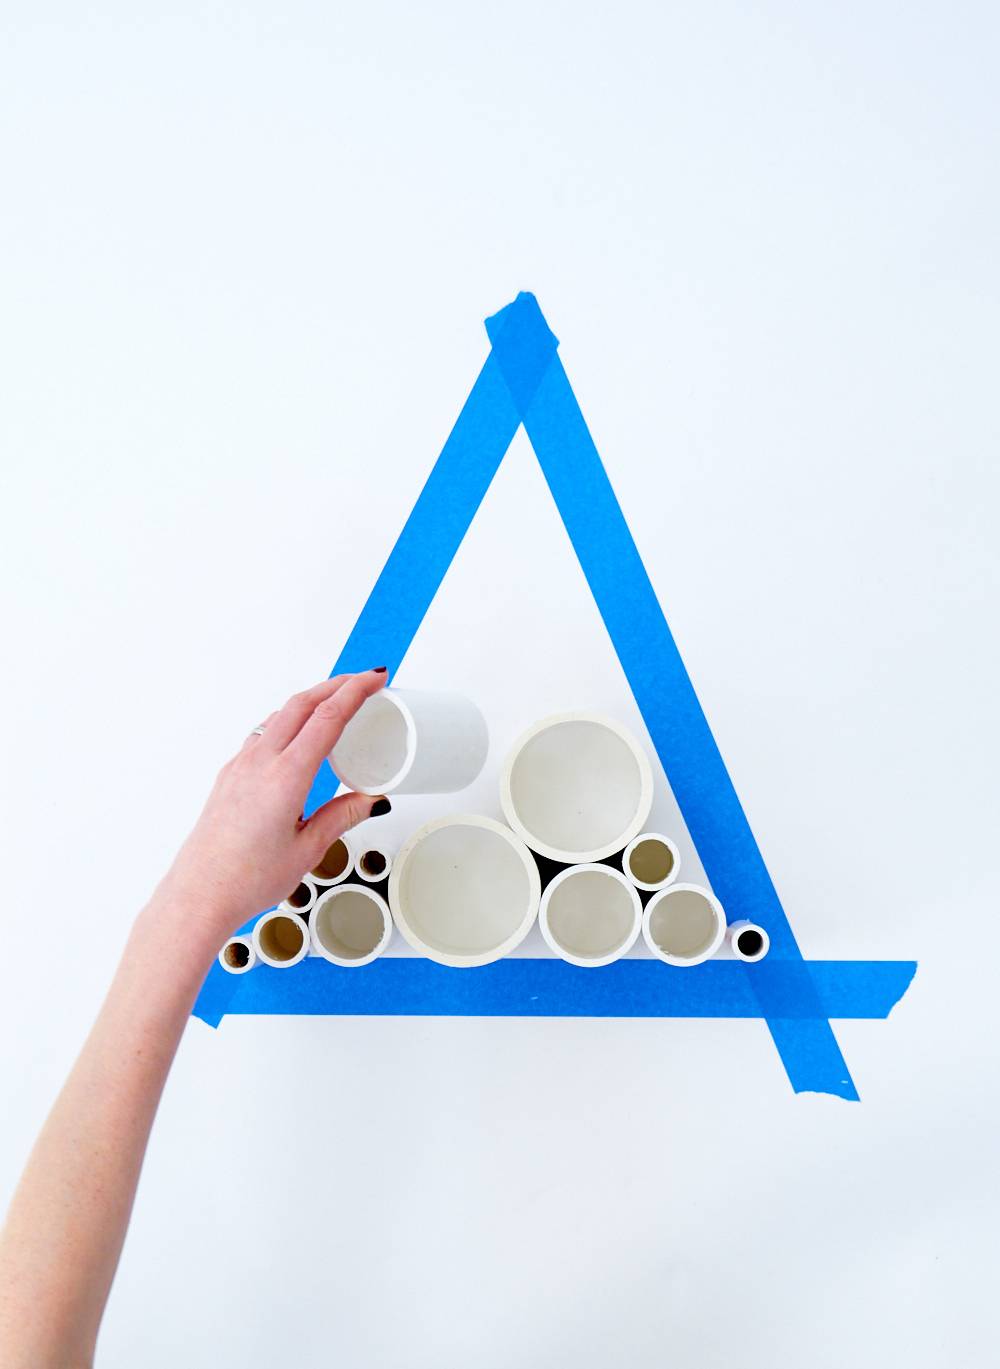 A person lines round pieces of PVC pipe up to fill a triangle space marked out blue tape.